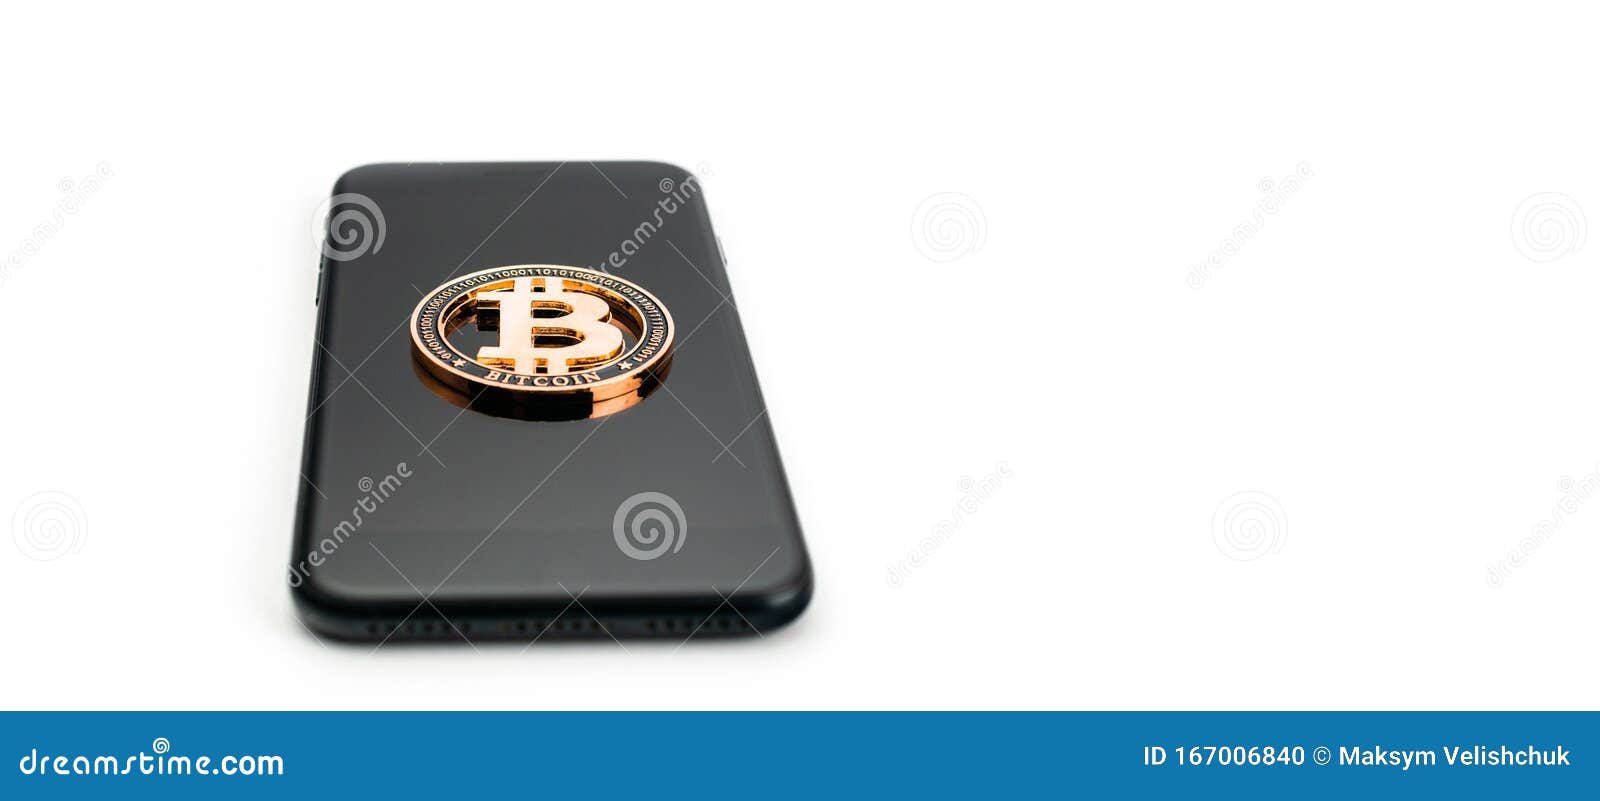 The Best Bitcoin Cash Wallets of - 7 Reliable Options